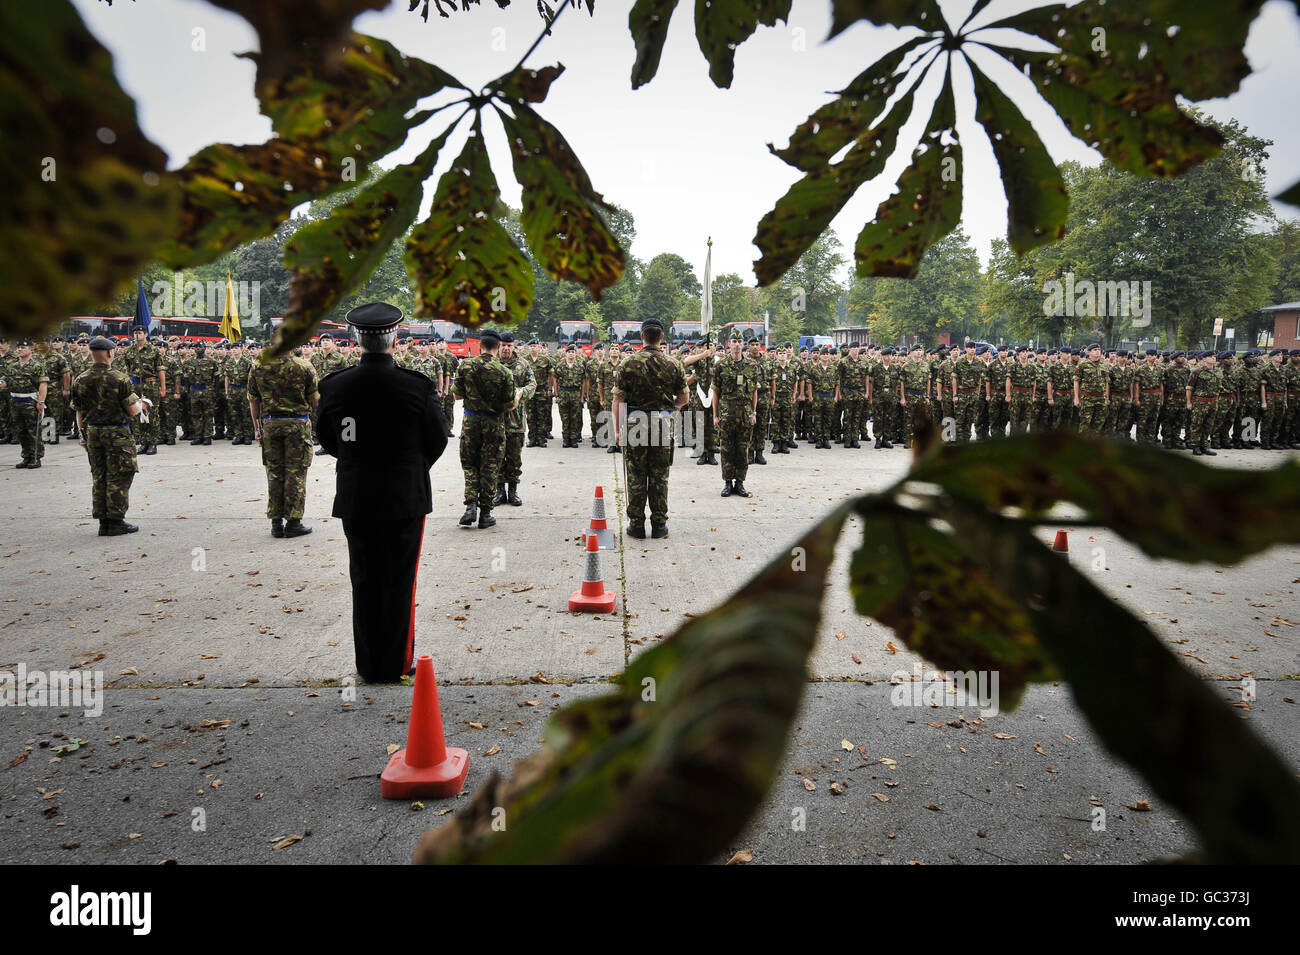 Soldiers line up in parade formation as British army personnel take part in a rehearsal for a homecoming parade on September 17th in the garrison city of Paderborn, Germany. Stock Photo